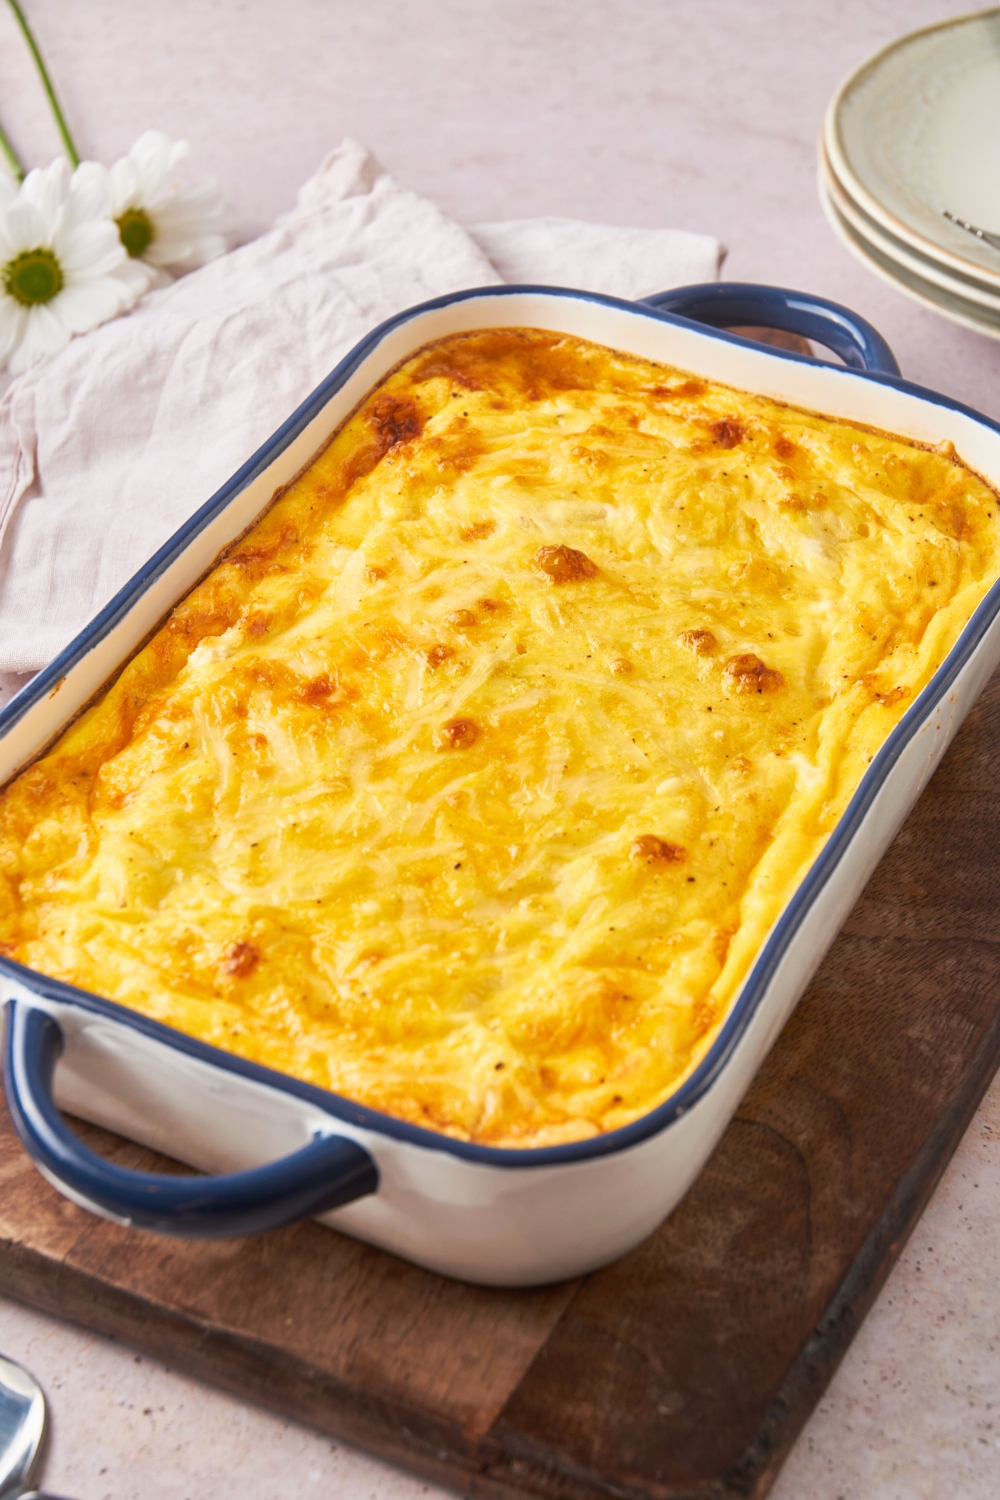 A cream cheese sausage casserole in a baking dish.